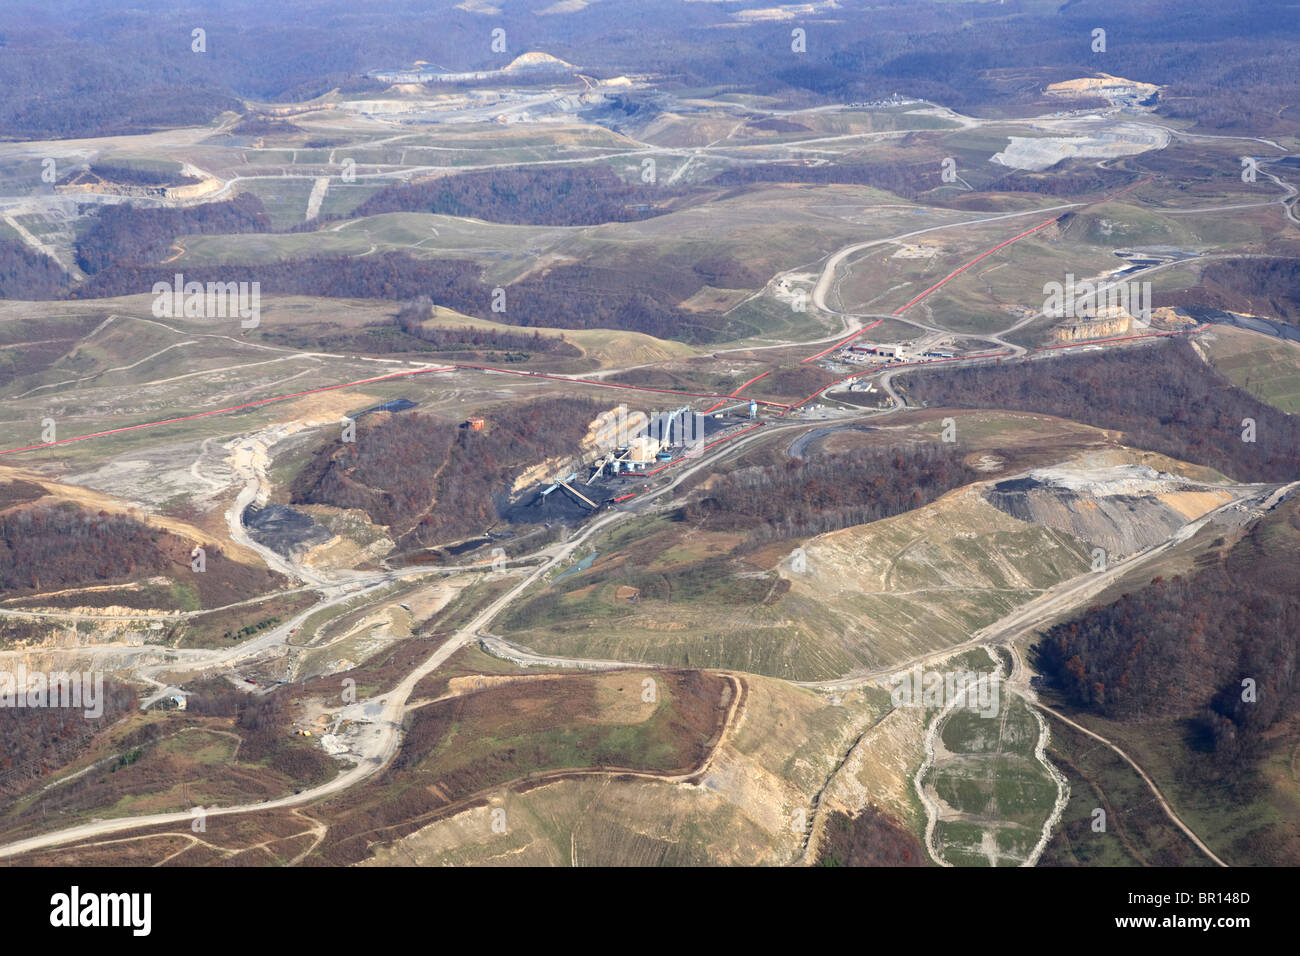 Aerial view of a mountaintop removal coal mining operation in West Virginia. Stock Photo